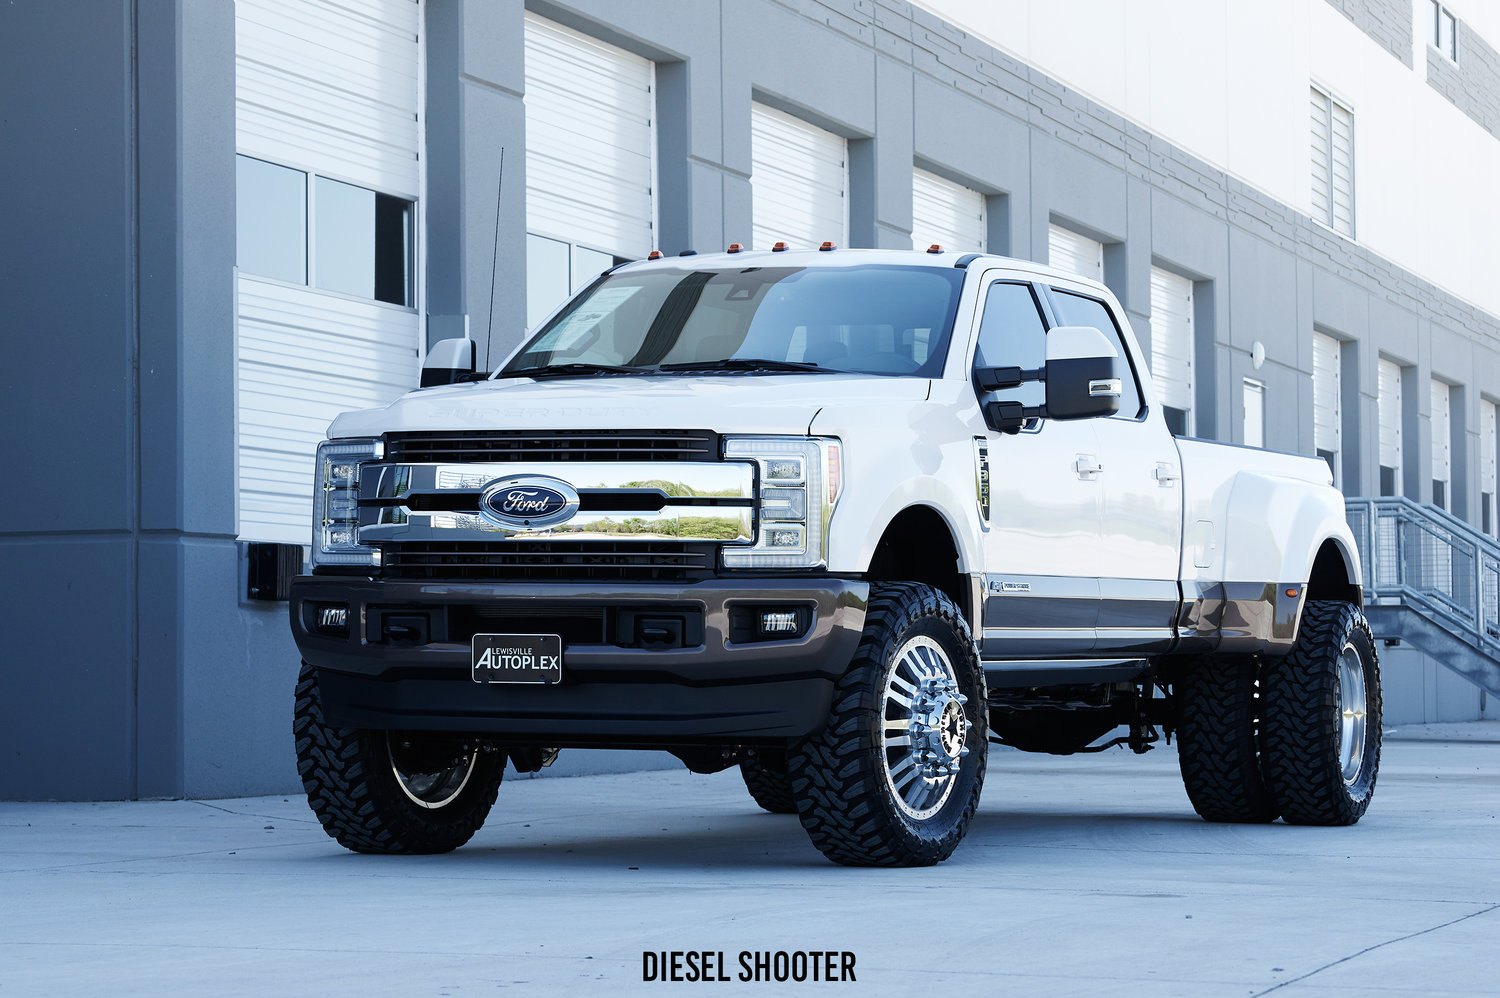 3 Inch Pro Comp Lift Kit on Custom Ford F-350 - Photo by Diesel Shooter